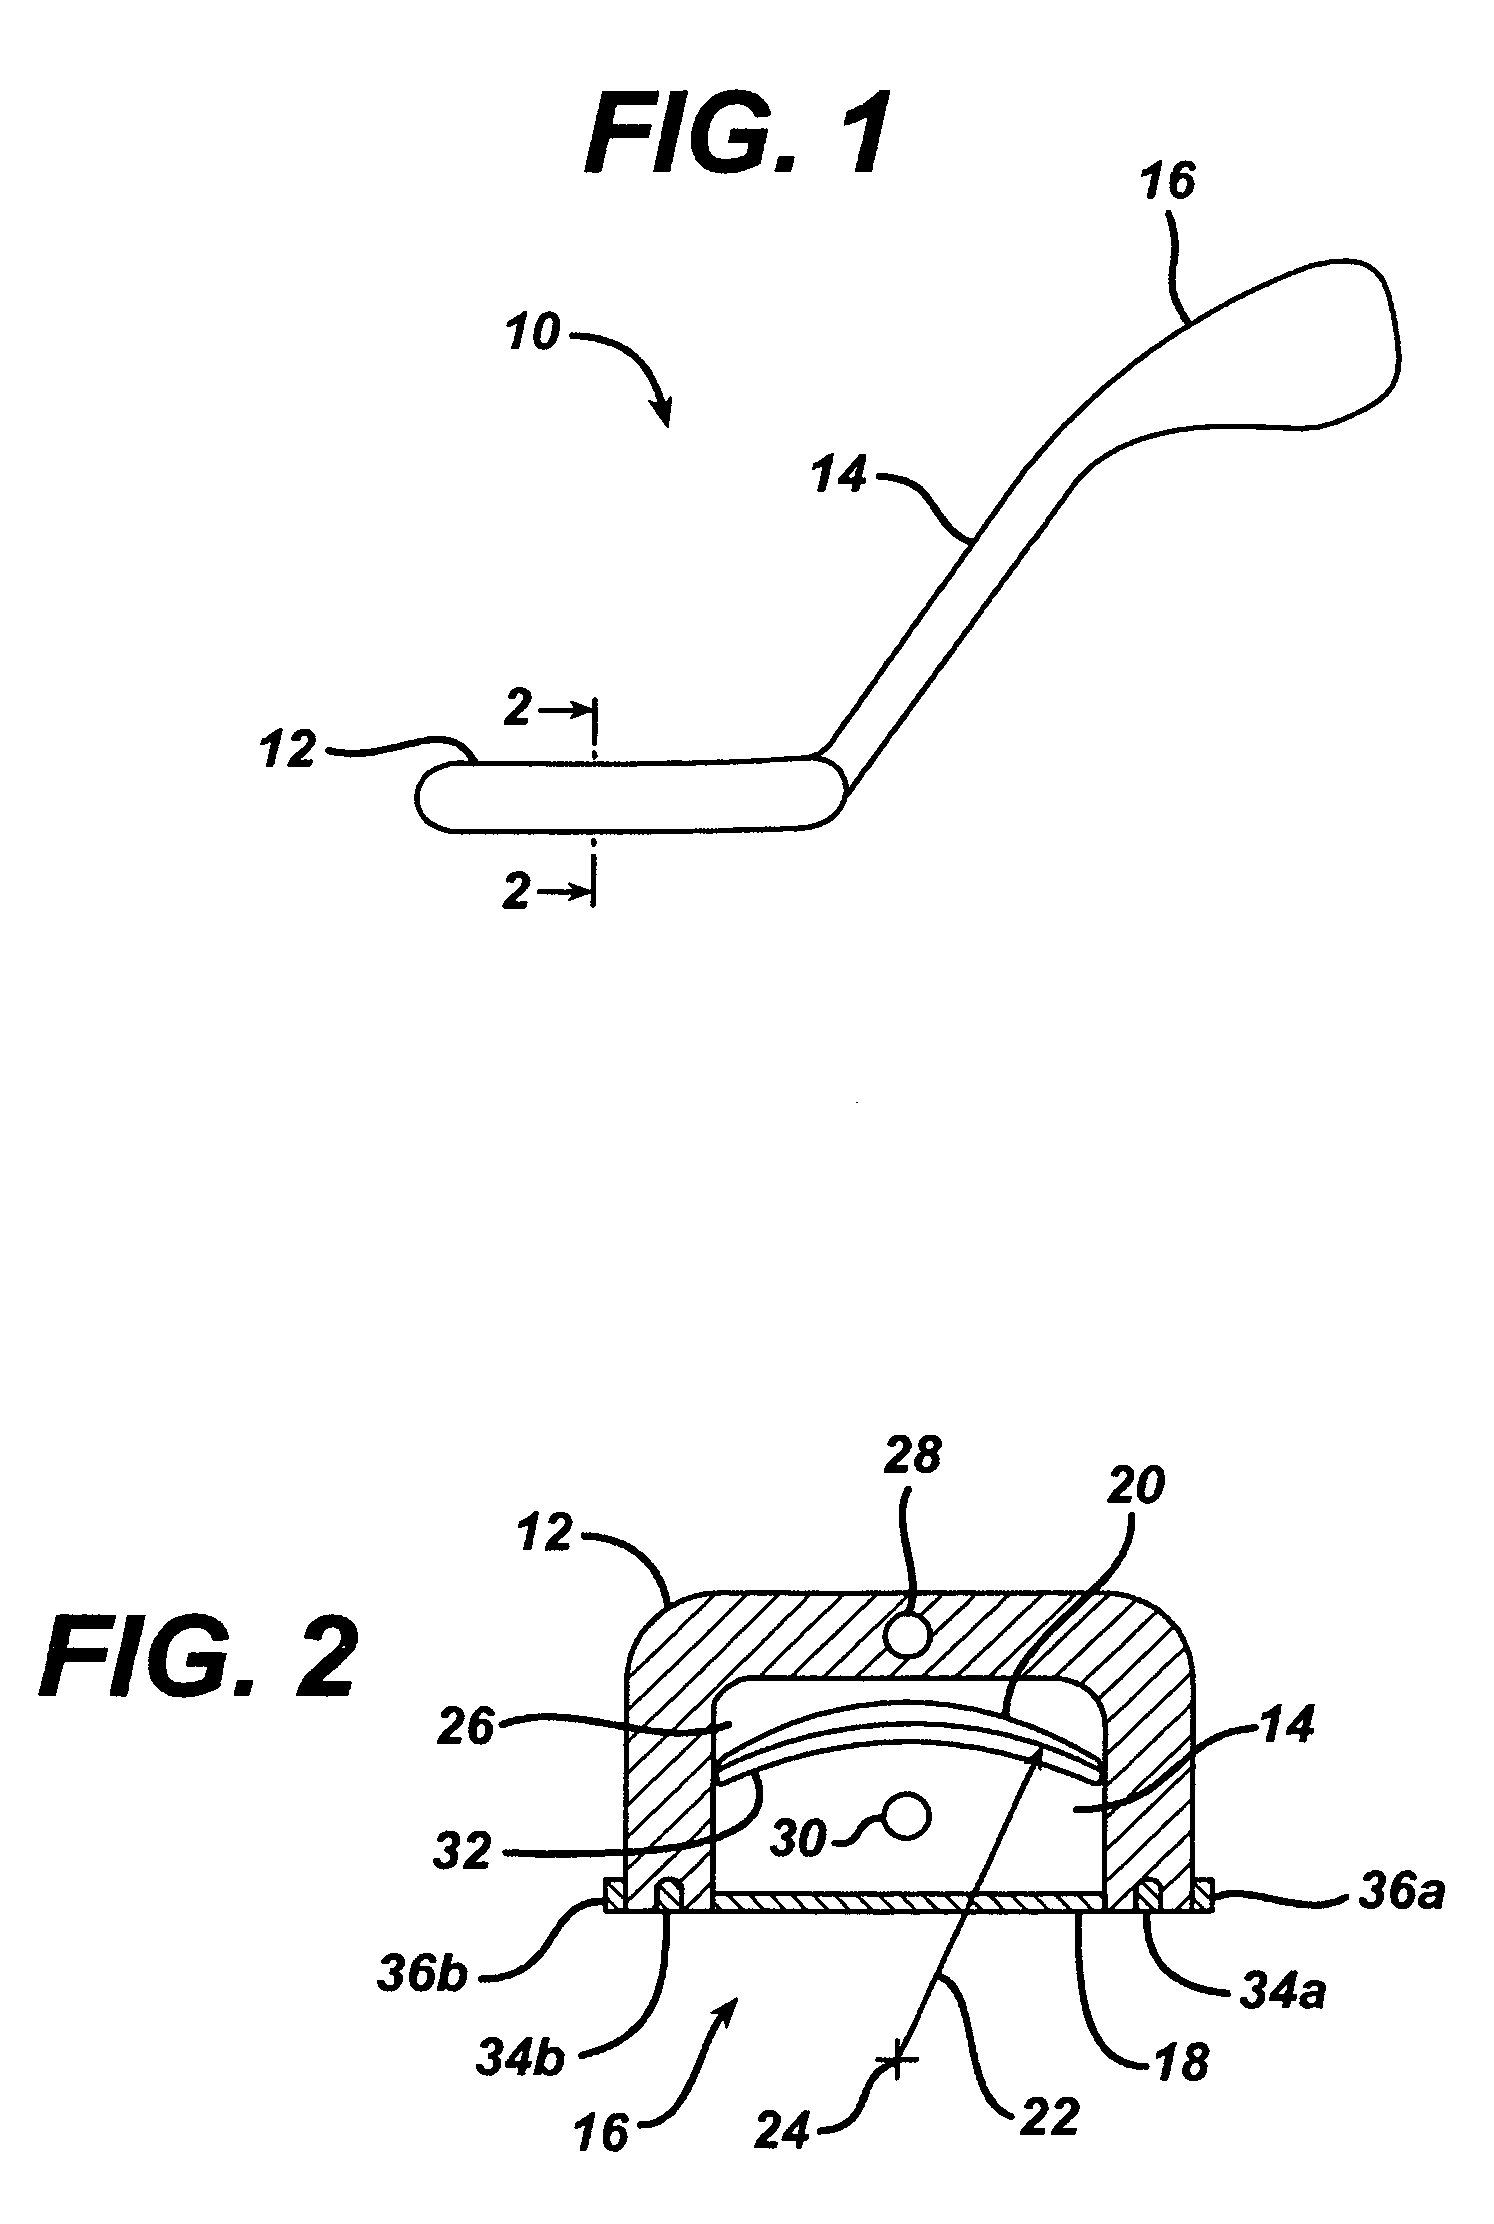 System for creating linear lesions for the treatment of atrial fibrillation